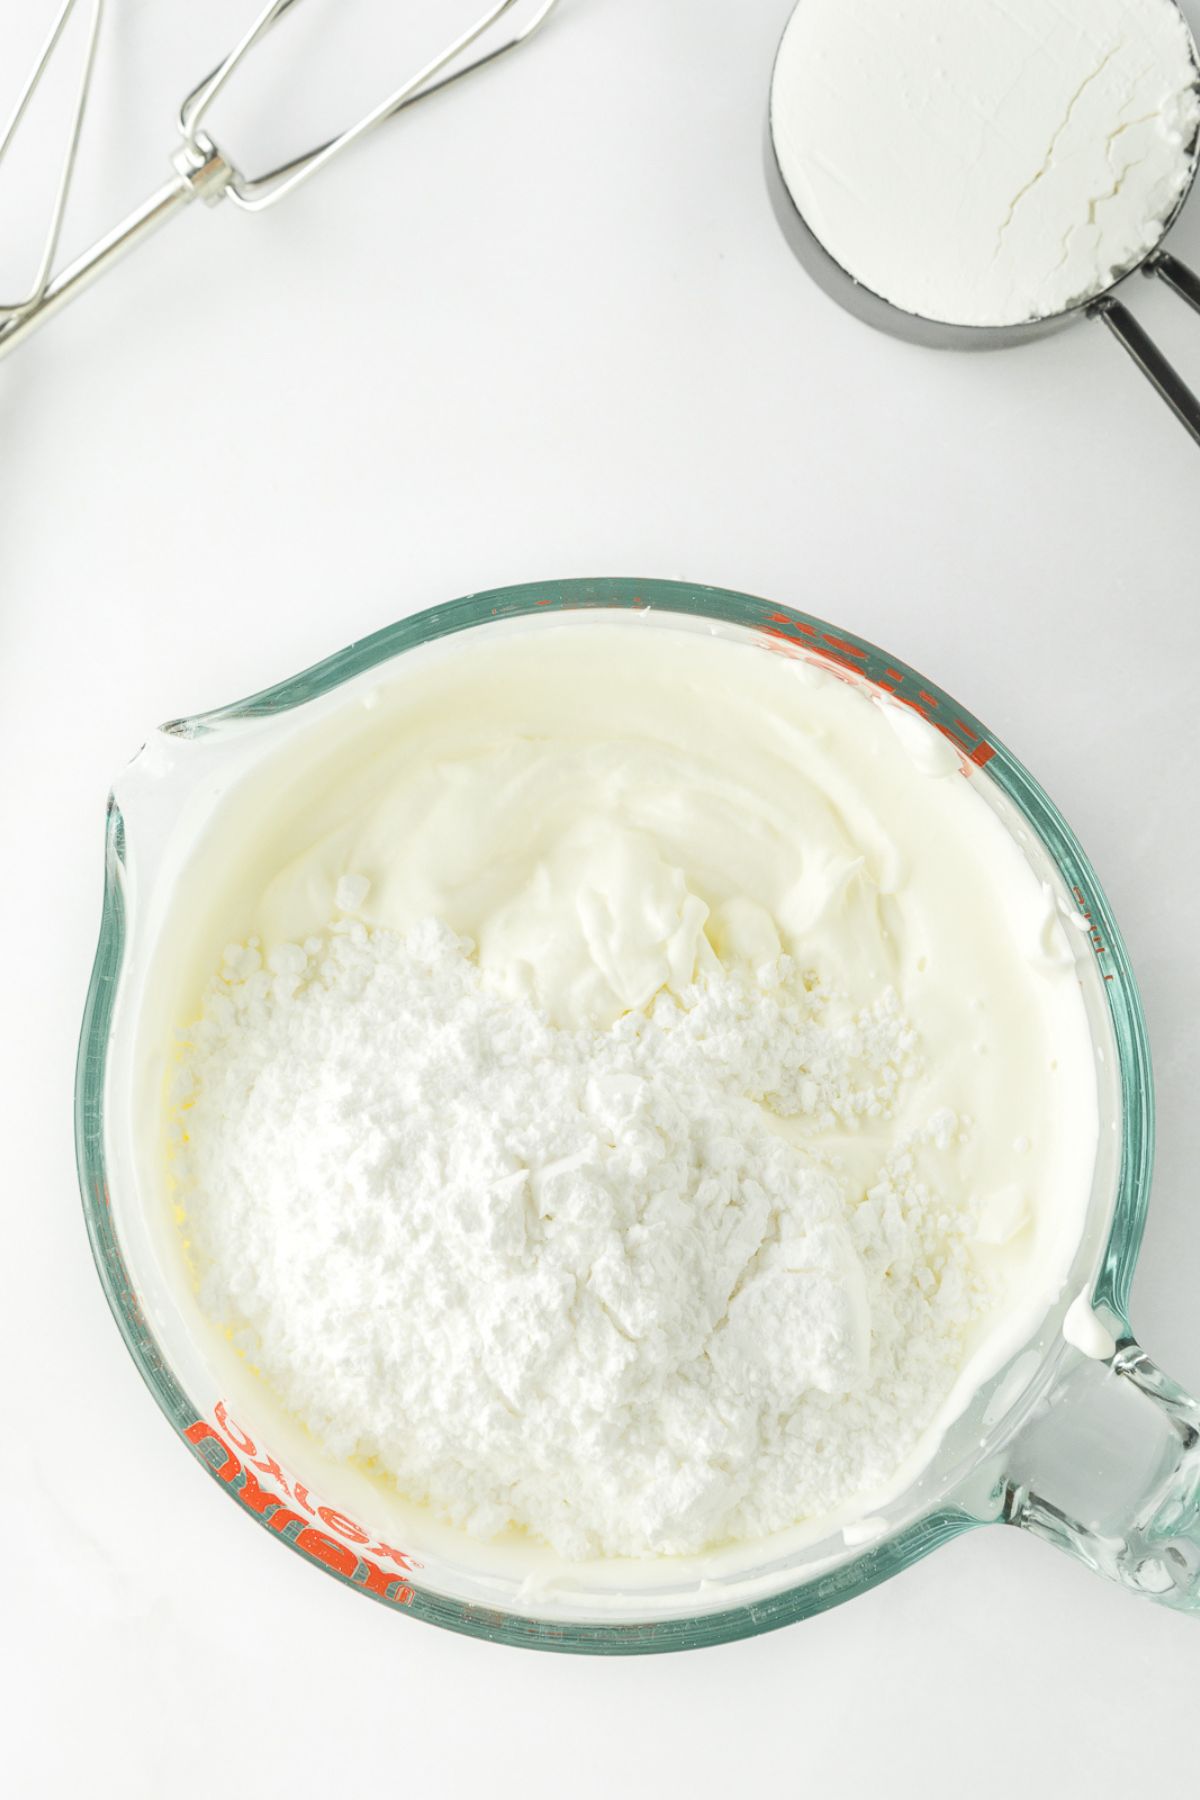 Mixing powdered sugar into whipped cream.